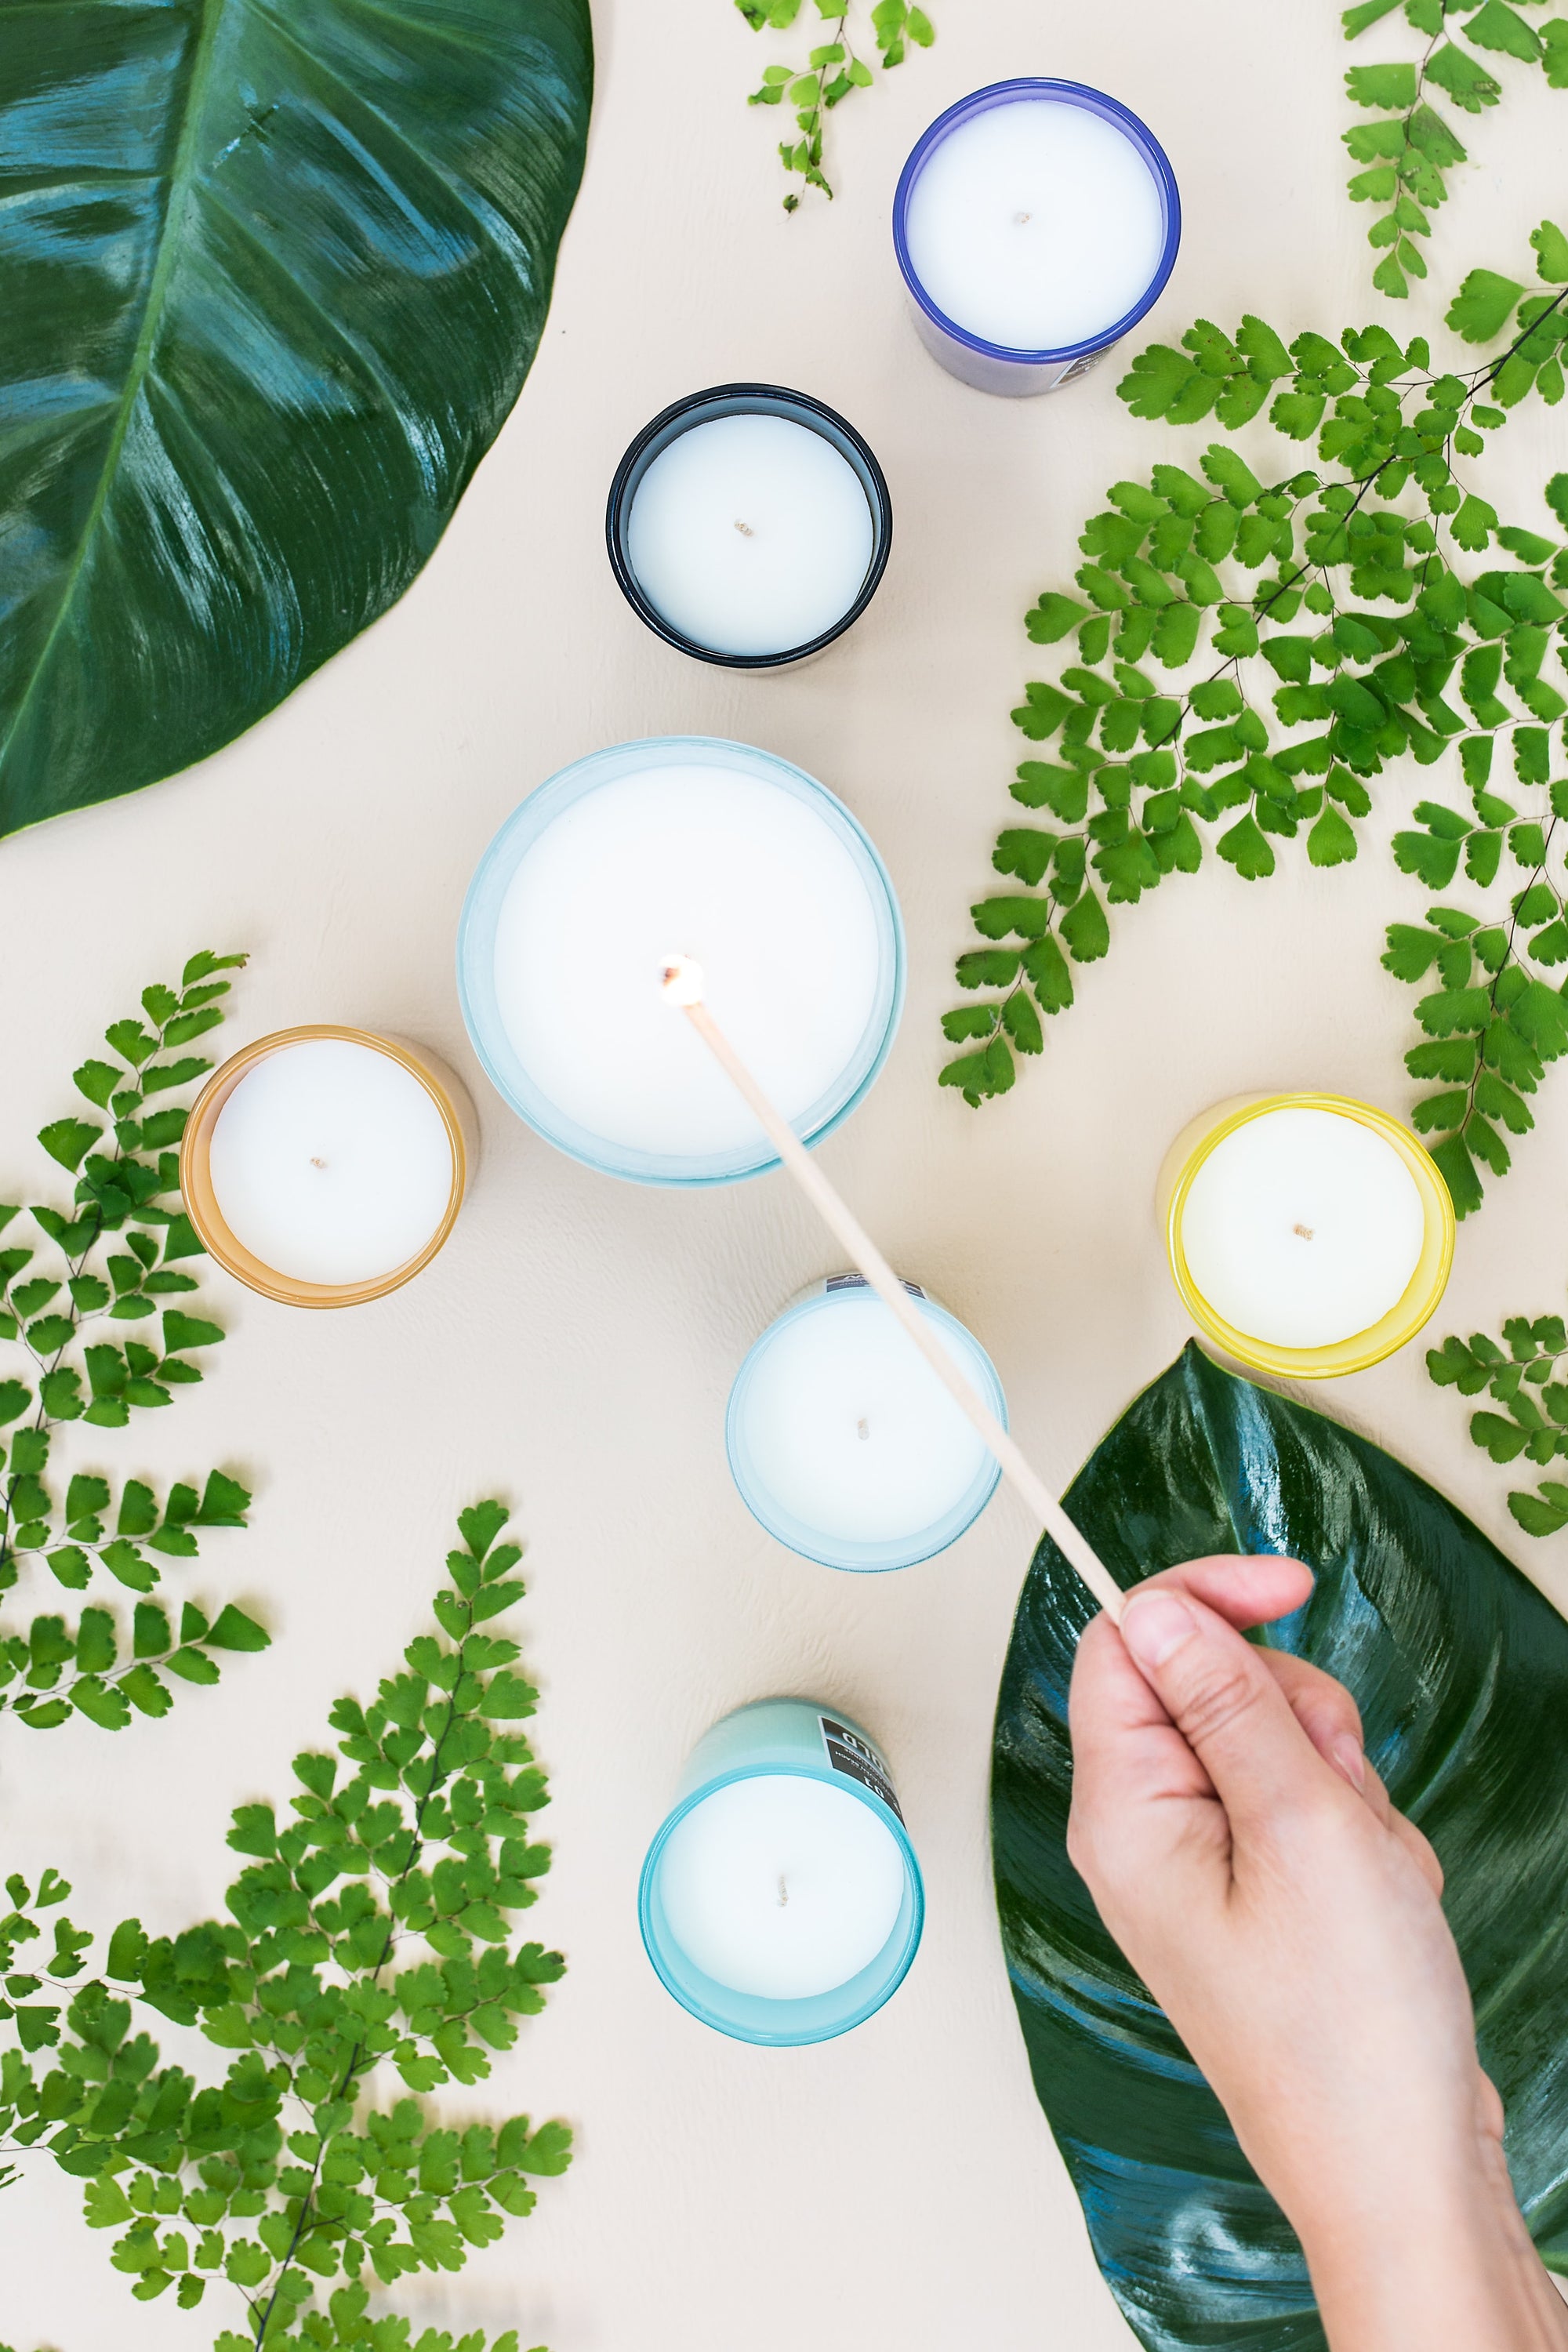 Seven Ways Scented Candles Can Increase Your Wellbeing